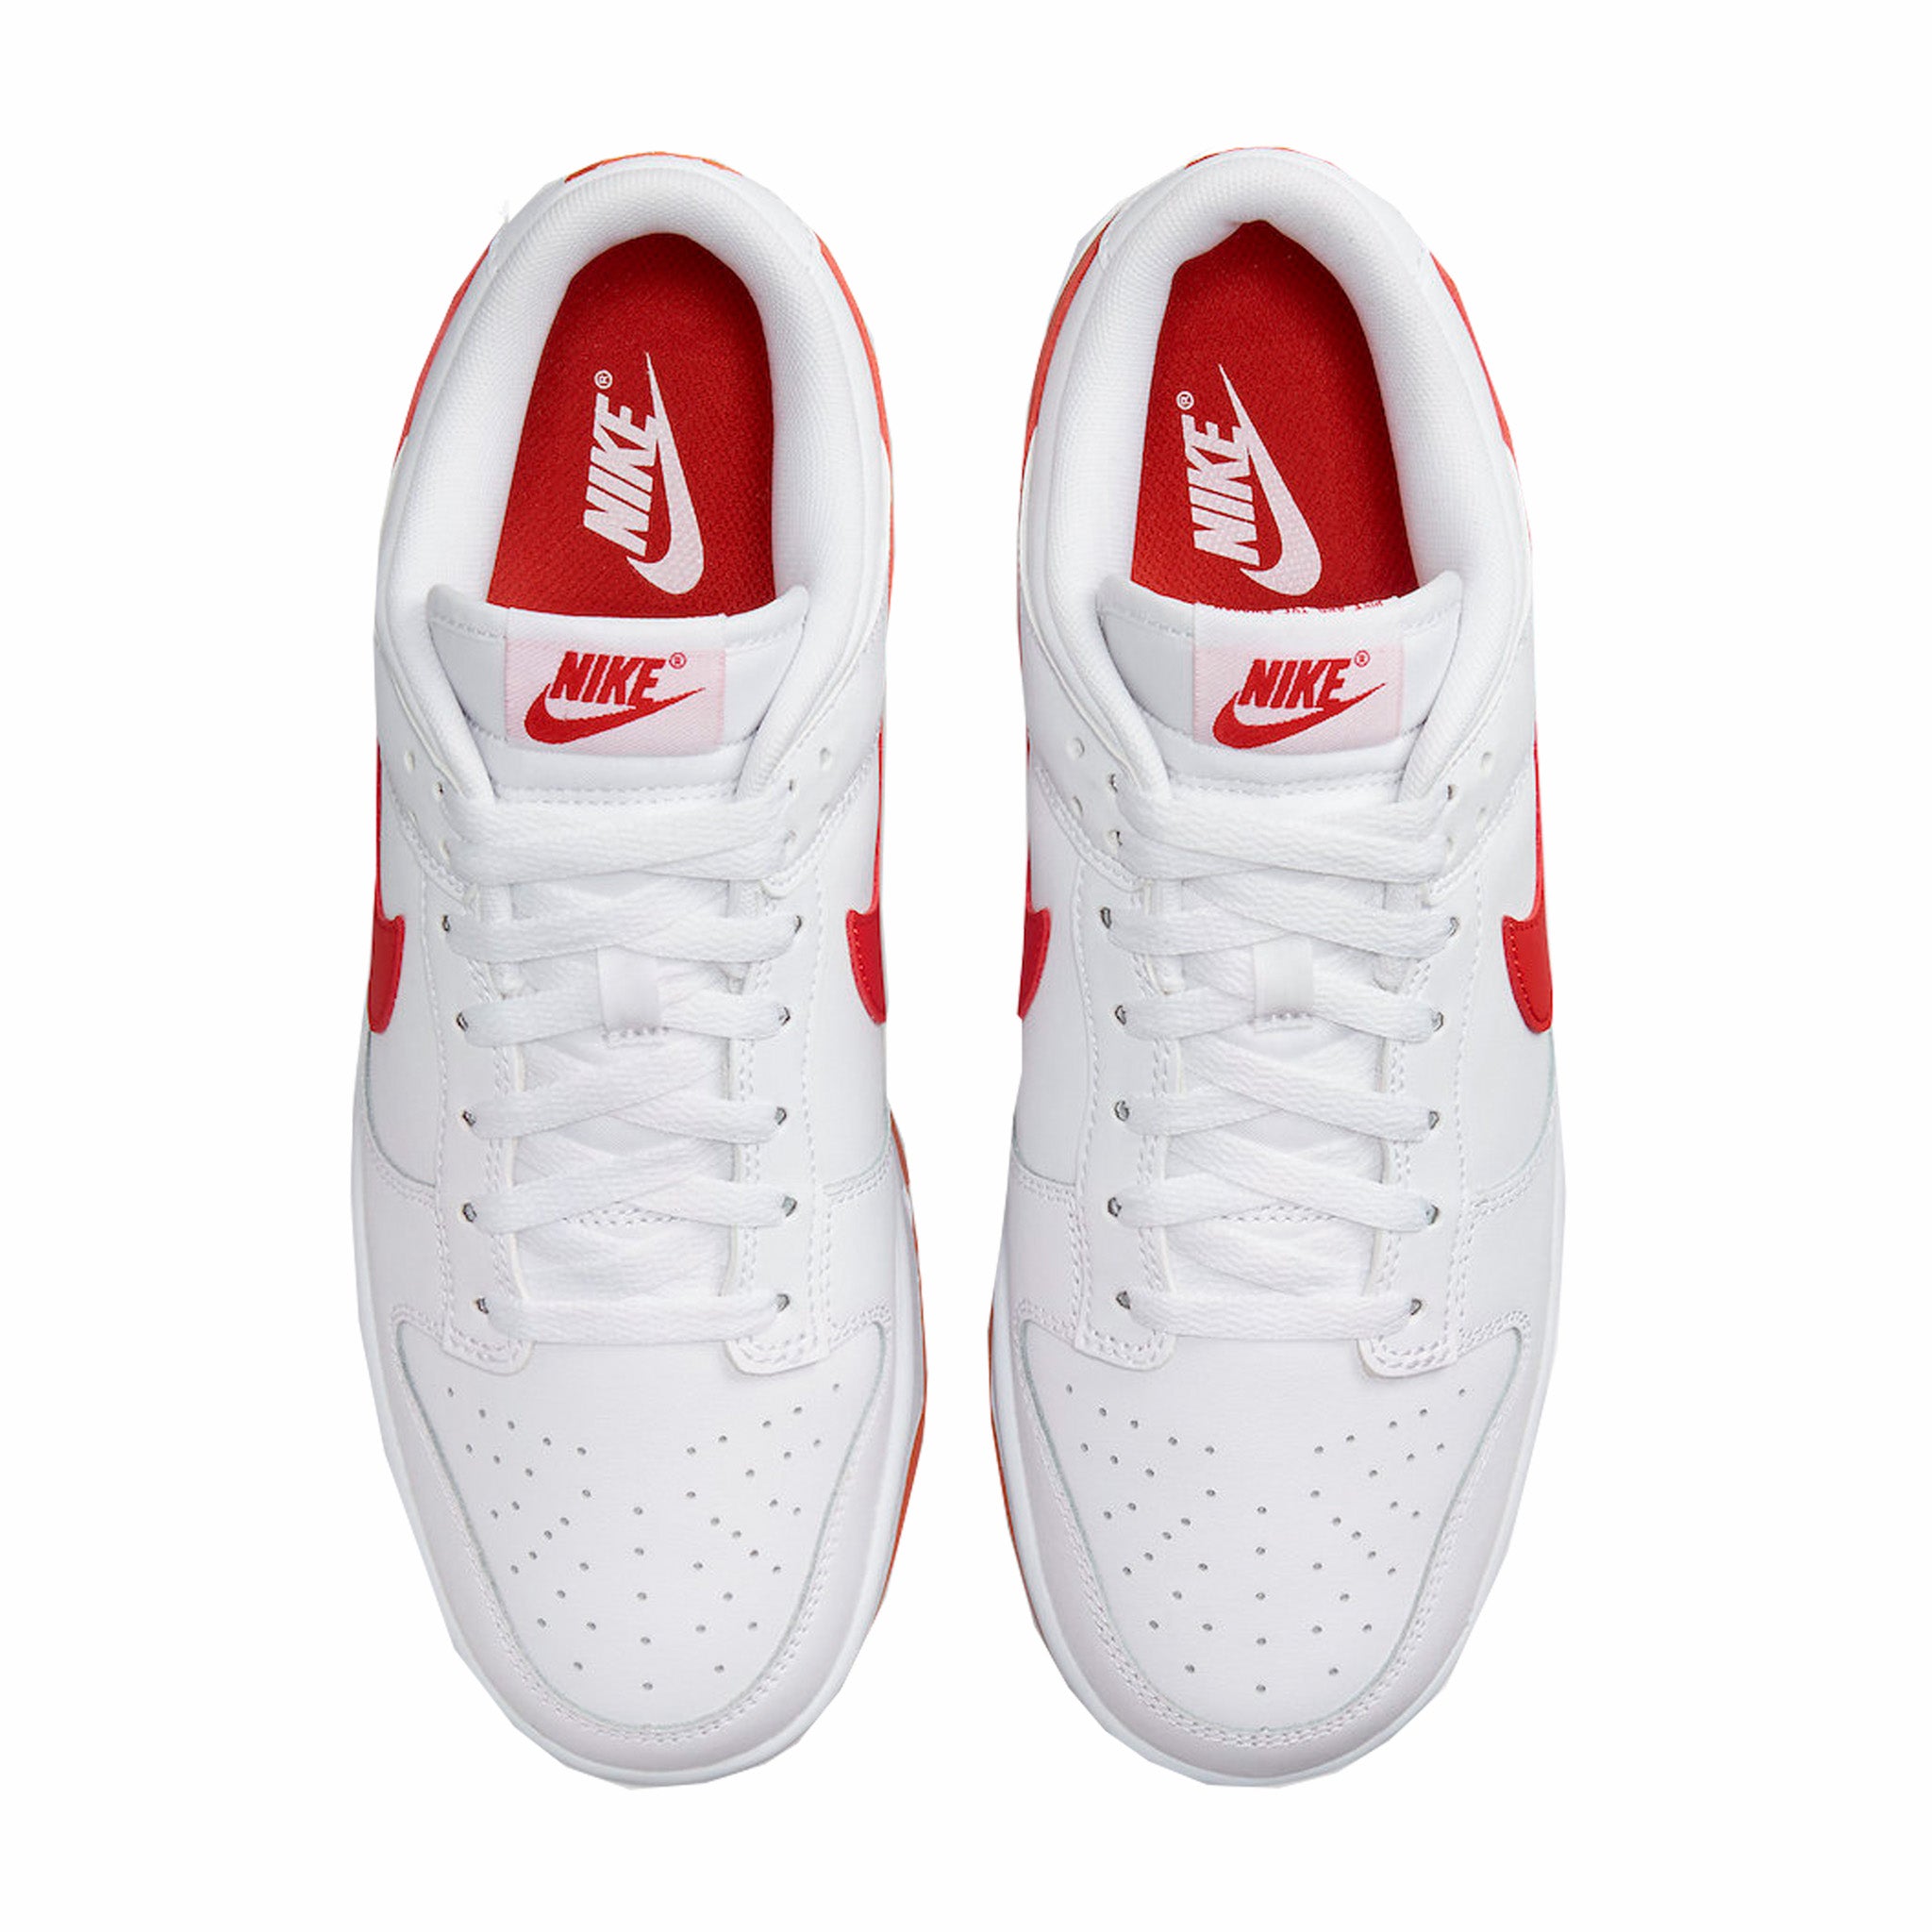 Nike Dunk Low “Picante Red” (White/Picante Red) - August Shop